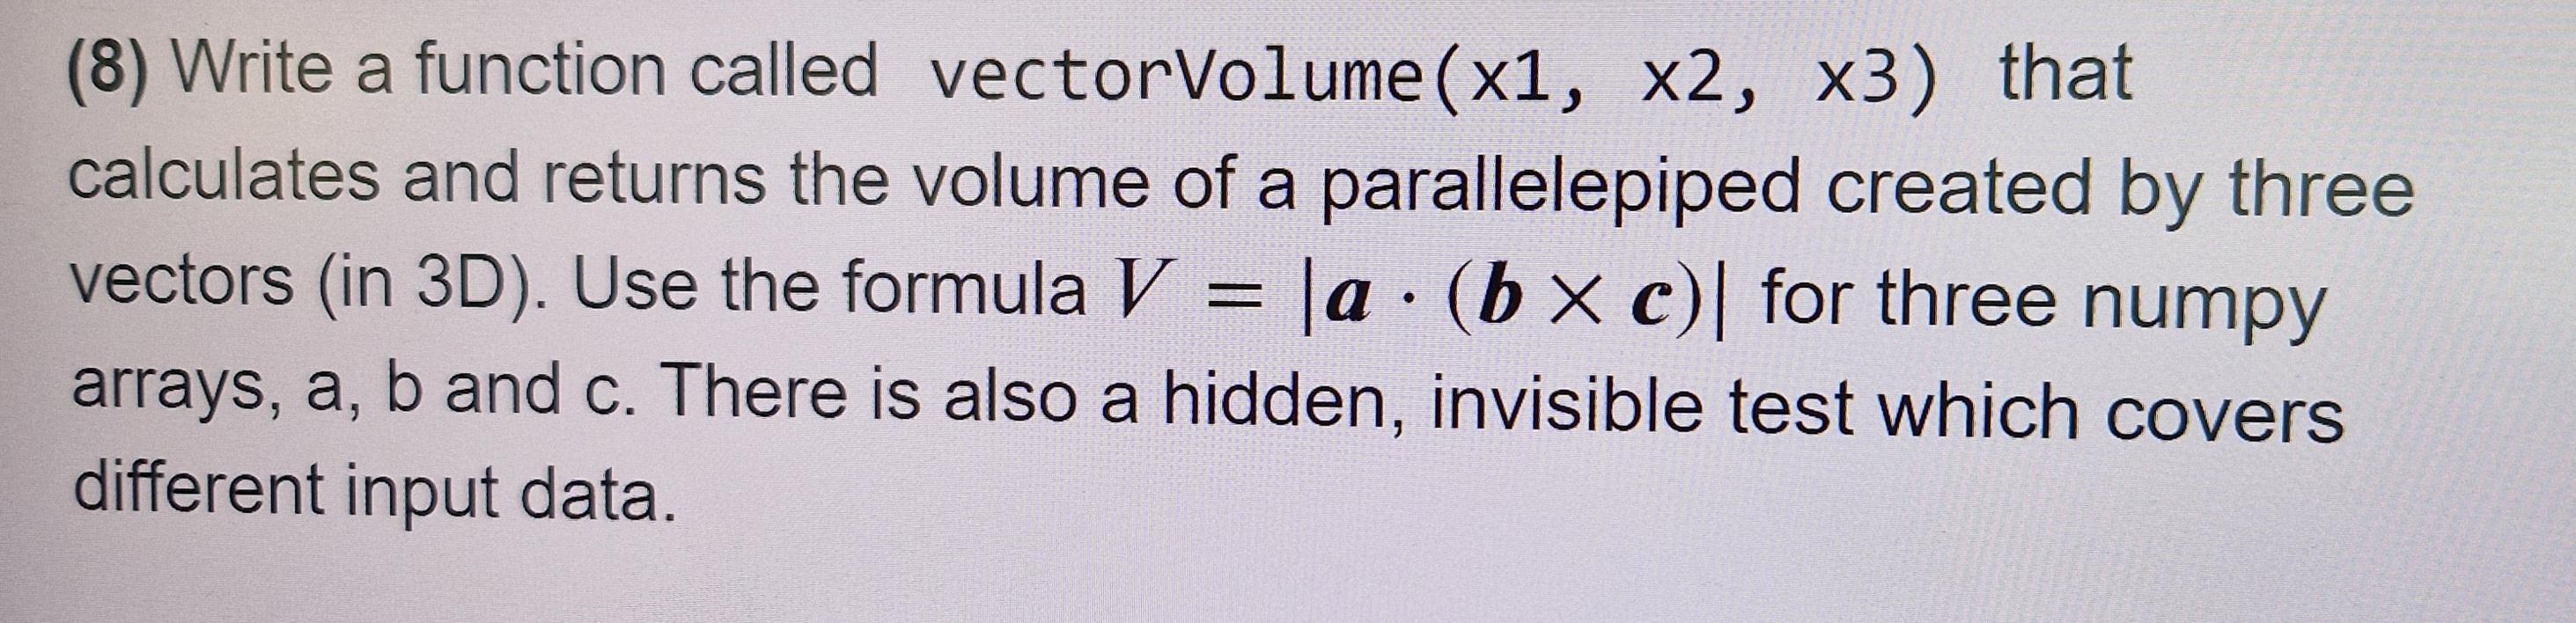 (8) Write a function called vectorVolume (x1, x2, x3) that calculates and returns the volume of a